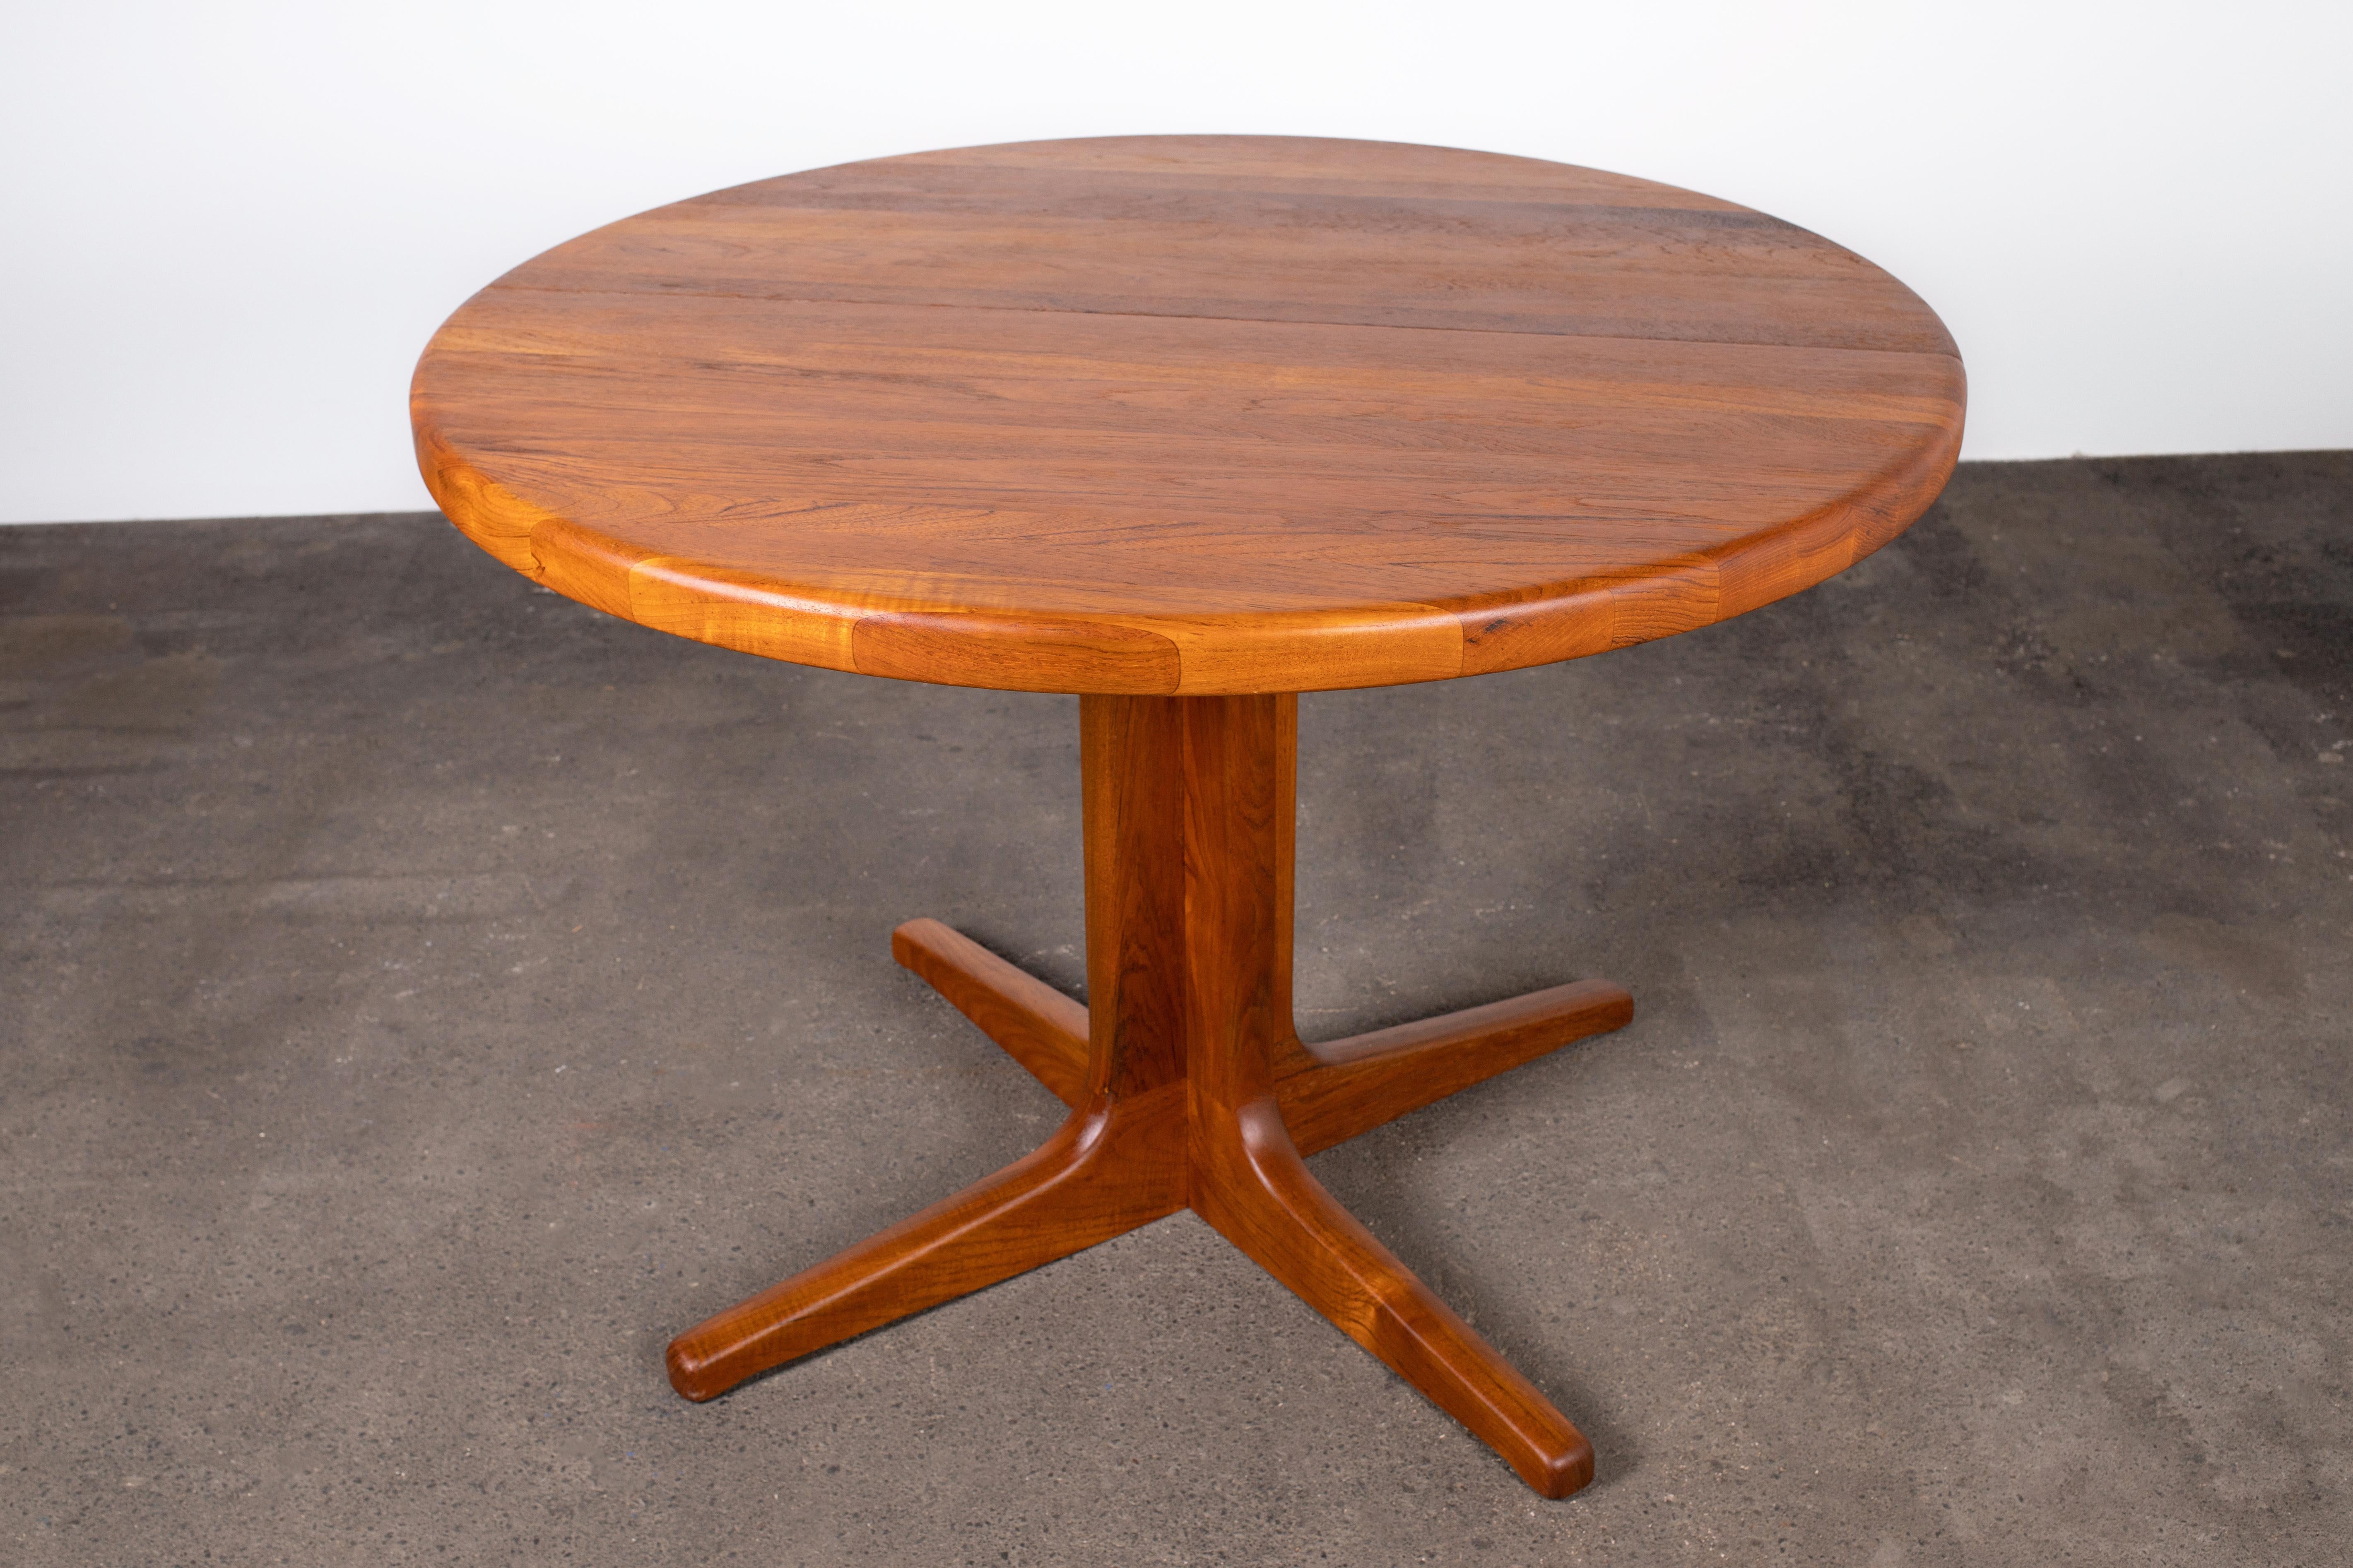 Very elegant 1960s round dining table Made in Denmark, unusually constructed from solid teak wood (not veneered).  Quintessential Scandinavian Modern design: minimal, fine materials, highly practical, clean smooth lines, sturdy construction and